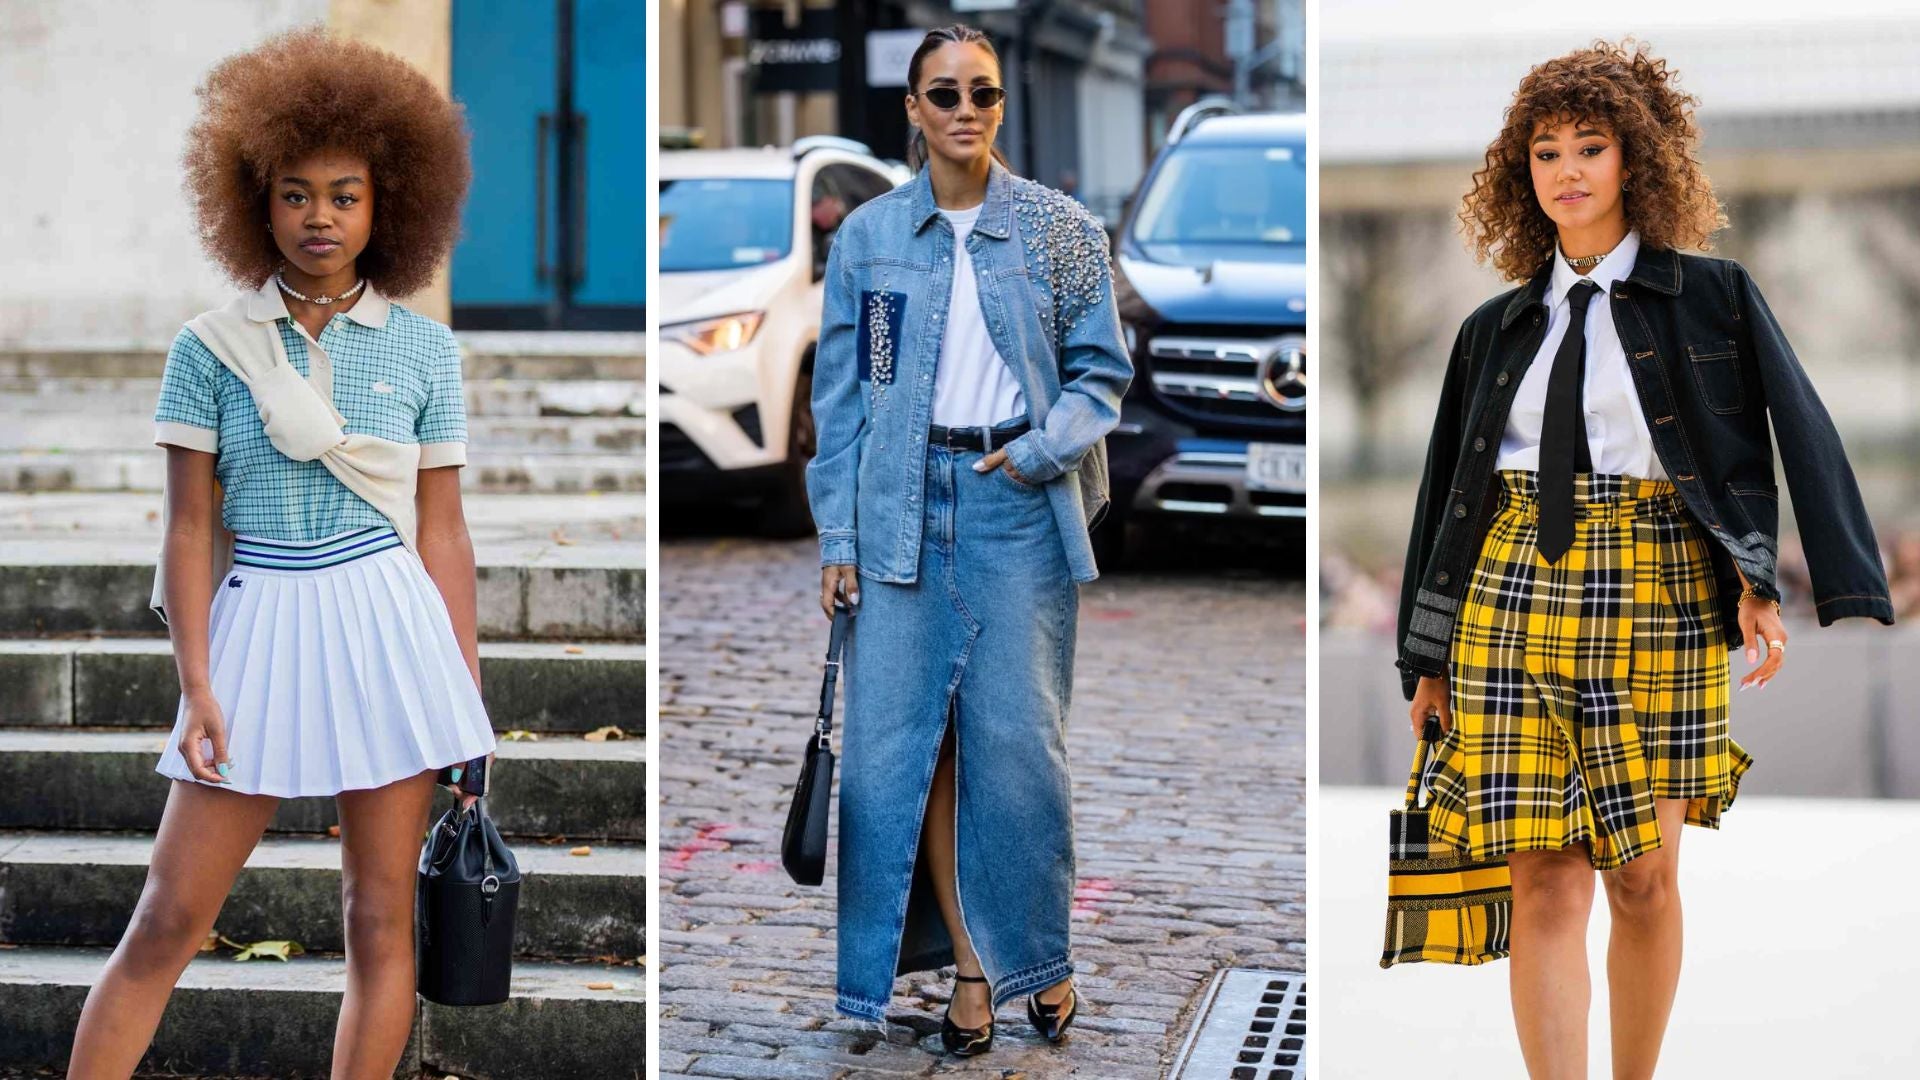 Redefining Edgy Your Guide To Blending Preppy And Punk Styles